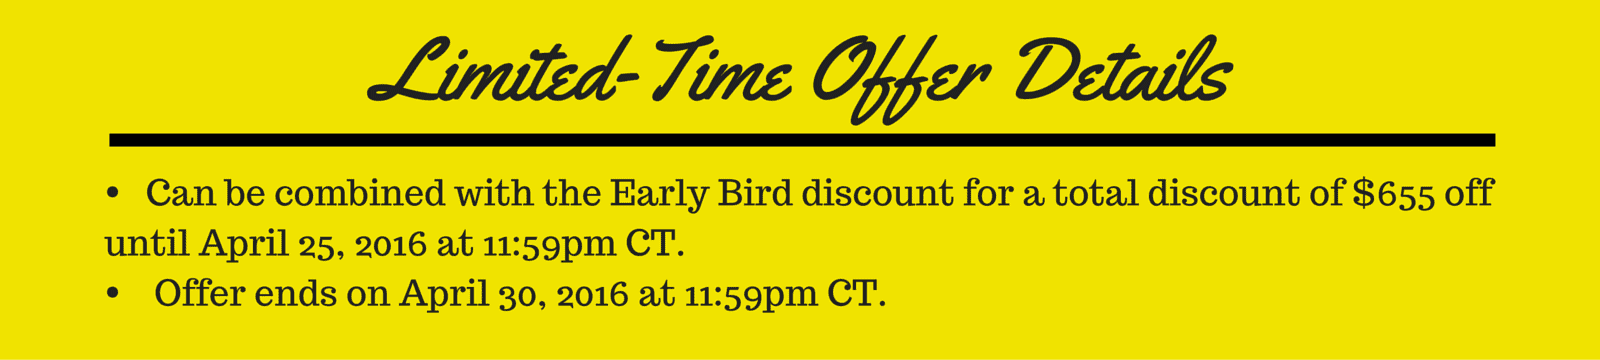 Limited-Time Offer Details: Limited-time offer of $200 can be combined with the Early Bird discount for a total discount of $655 off until April 18th at 11:59pm CT. Offer ends on April 30th at 11:59pm CT.